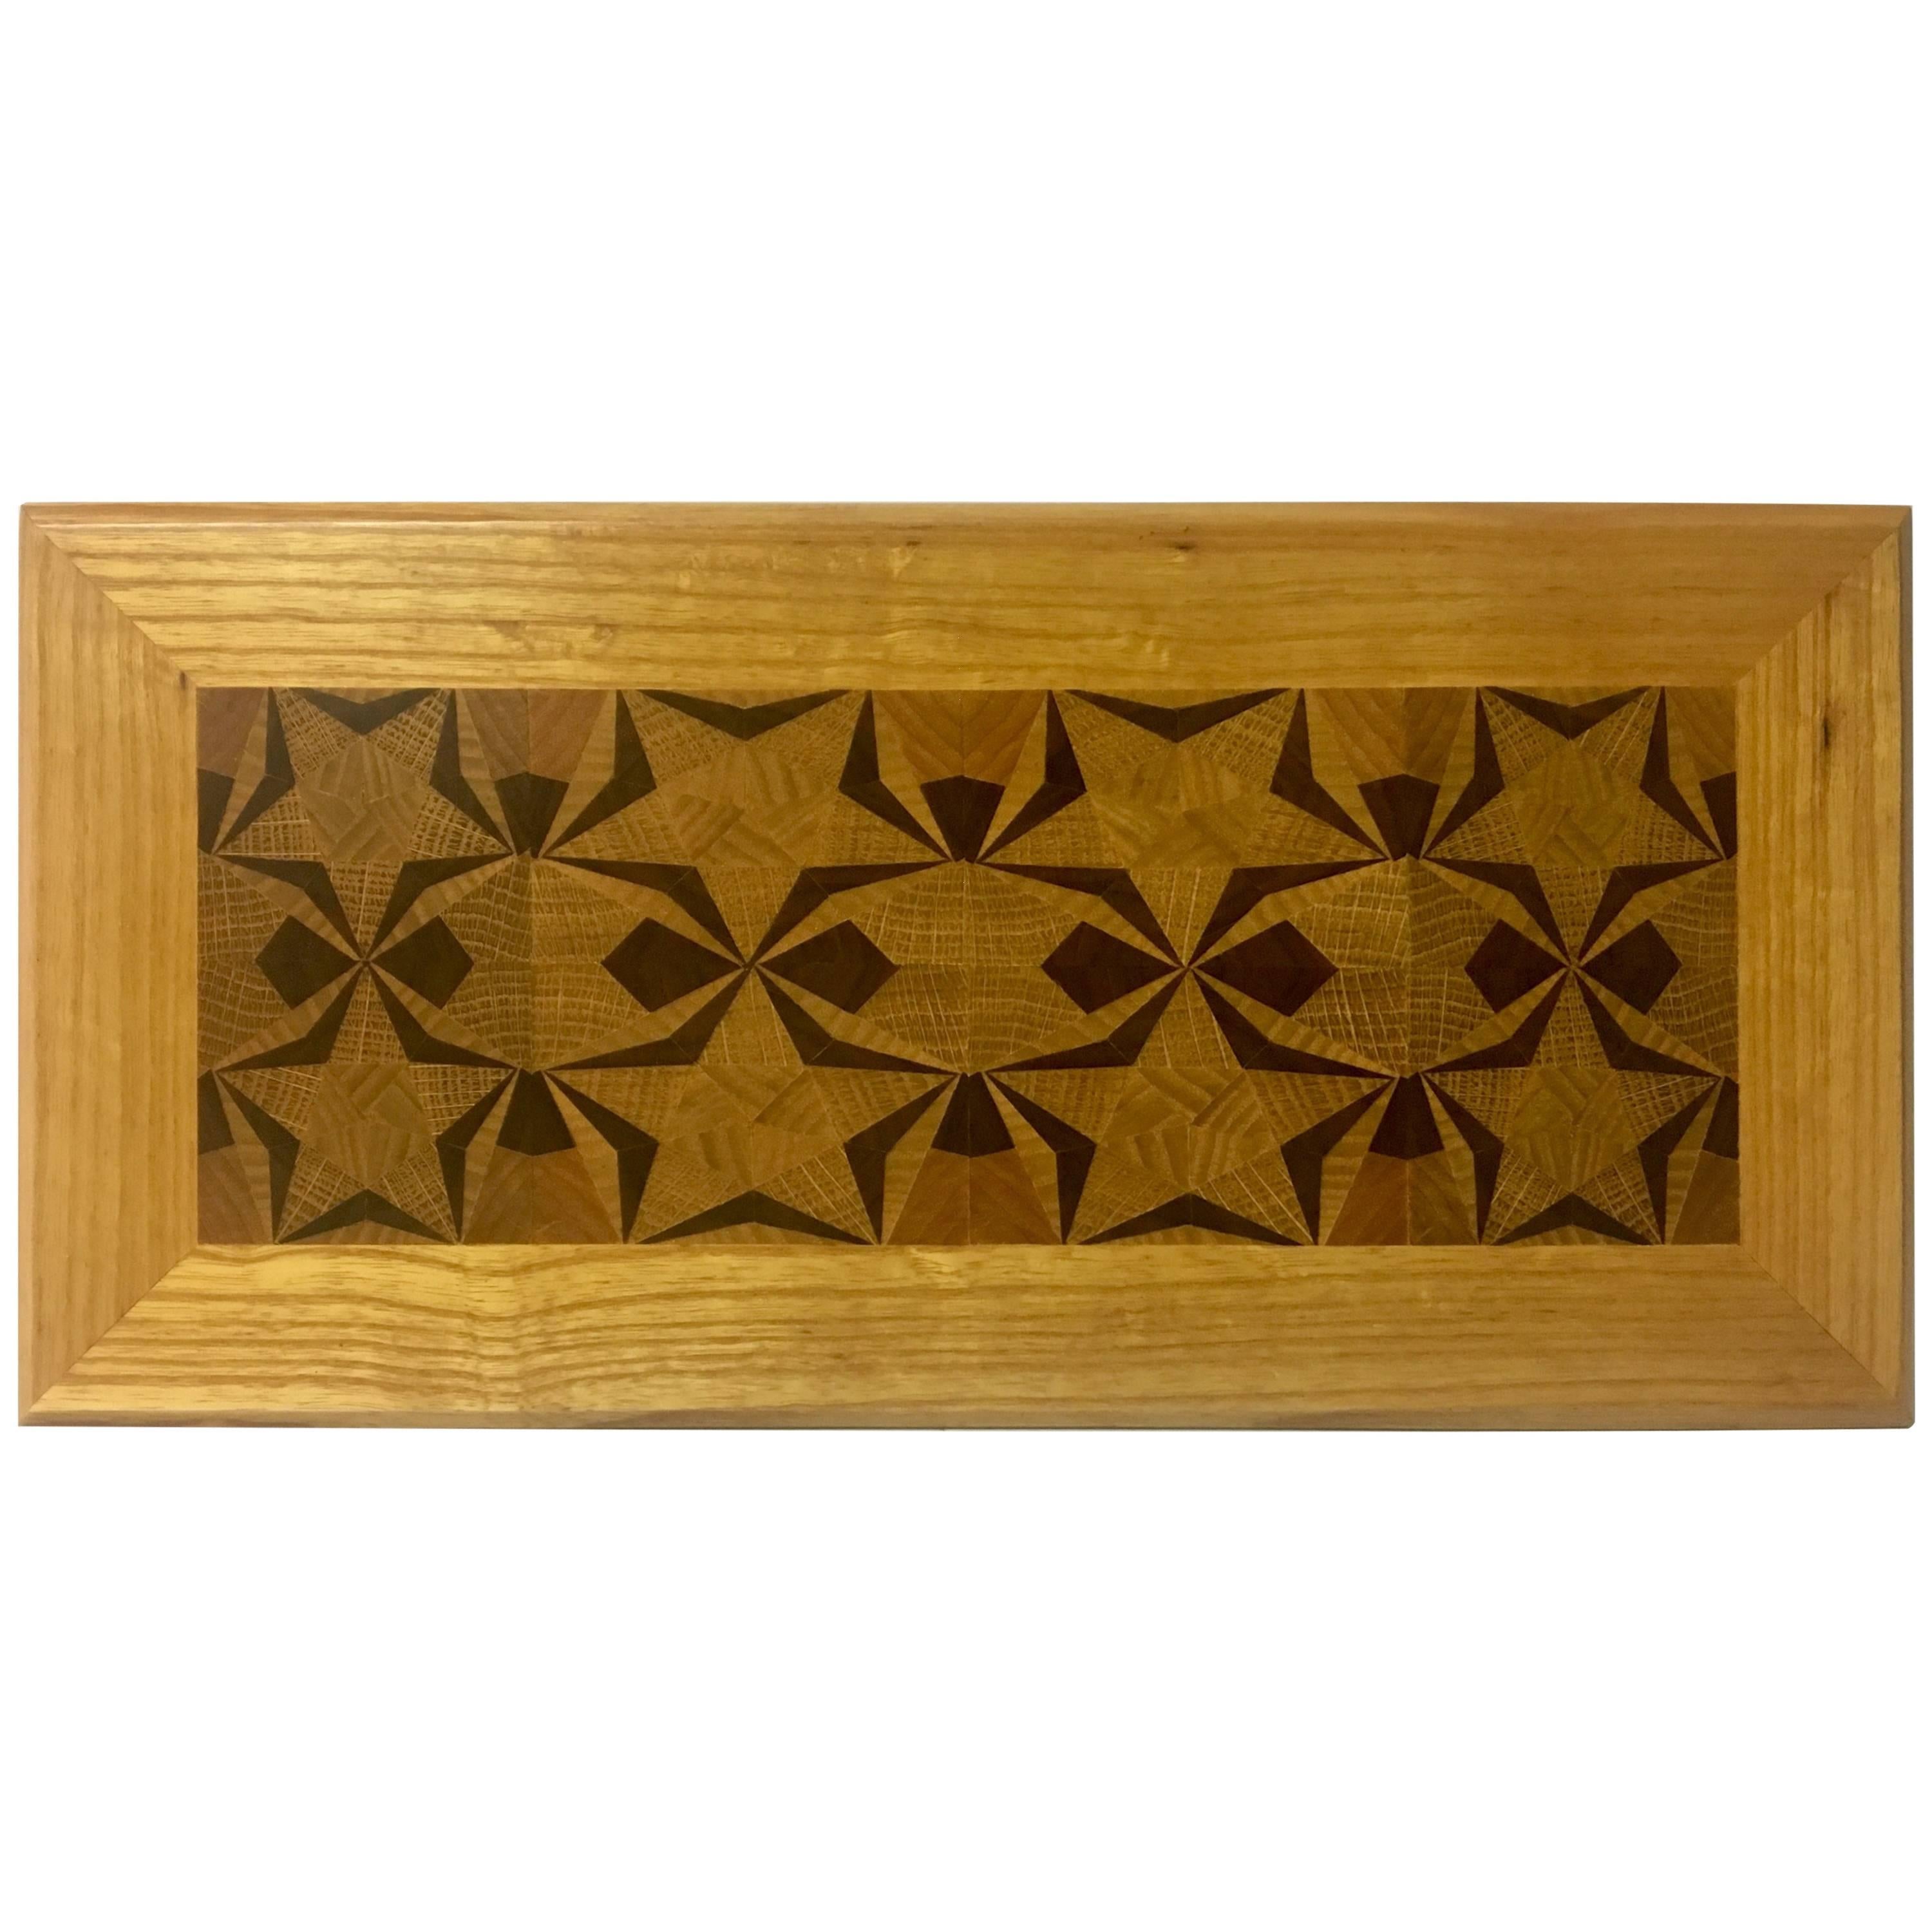 Mix Woods Inlaid Wall Plaque